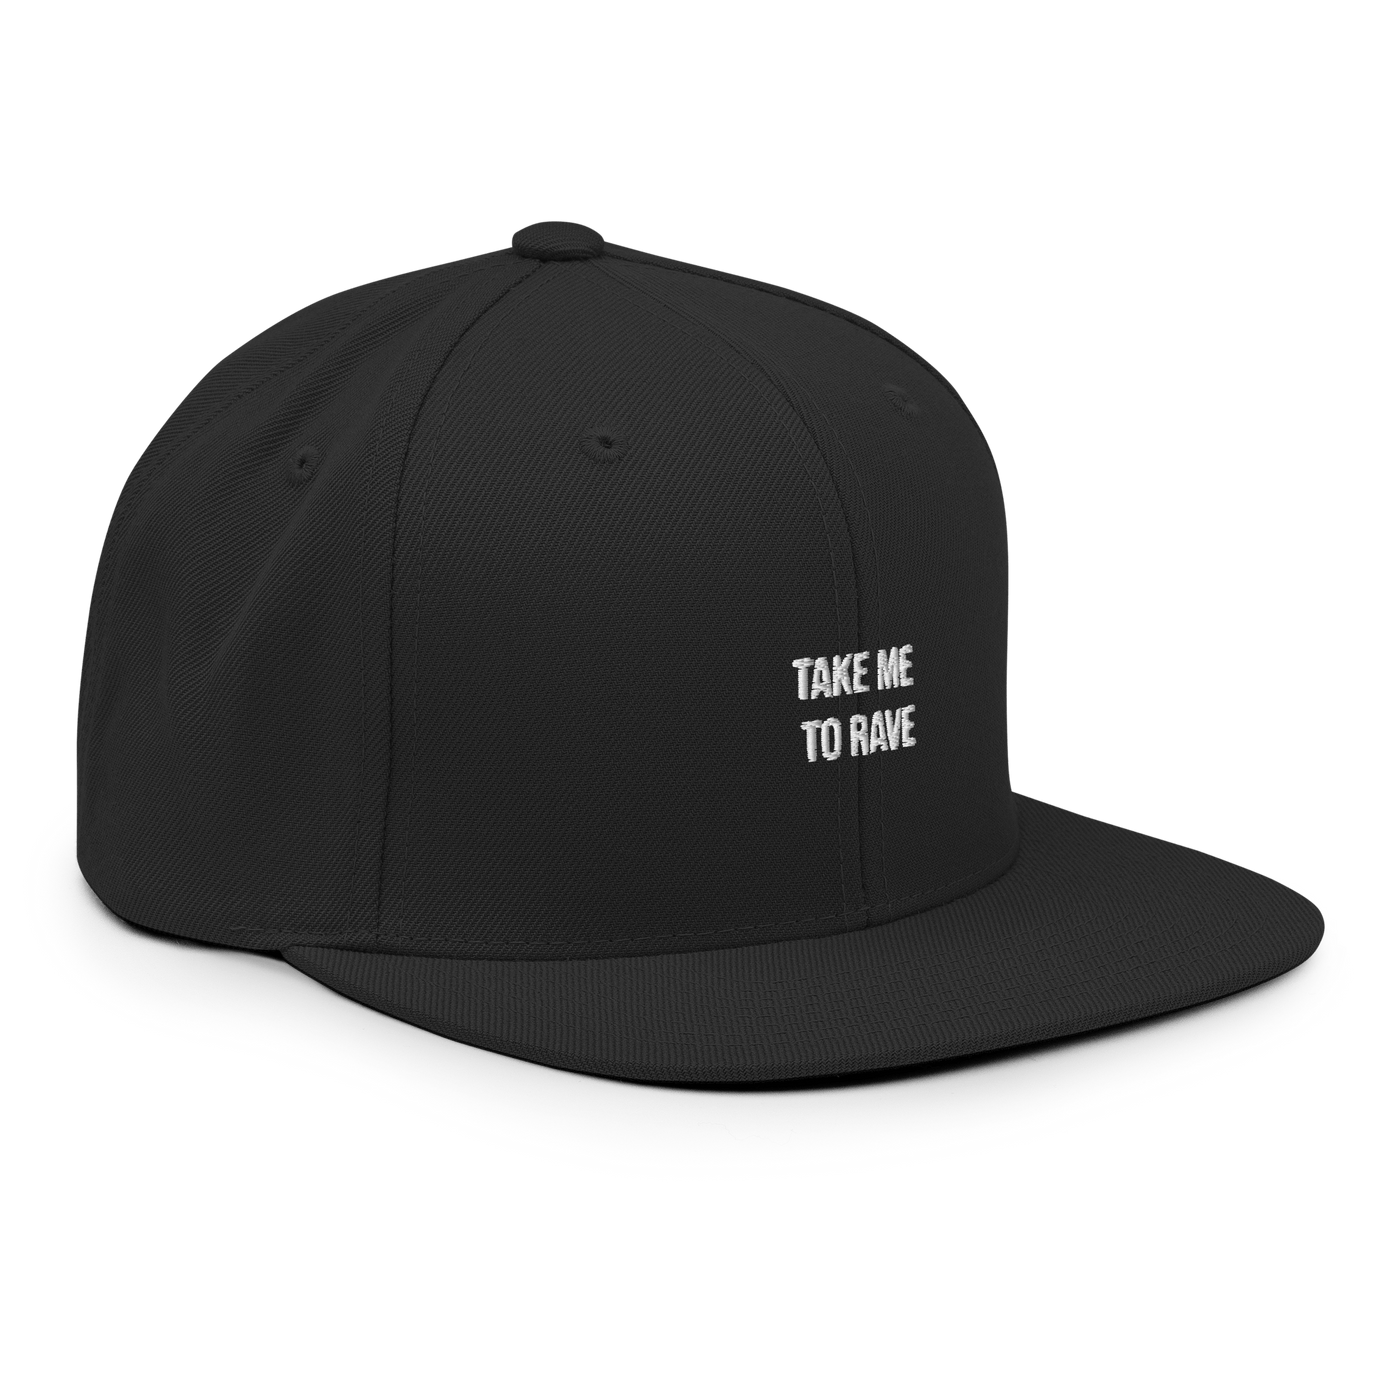 Take me to rave Snapback - Black - - Just Another Cap Store